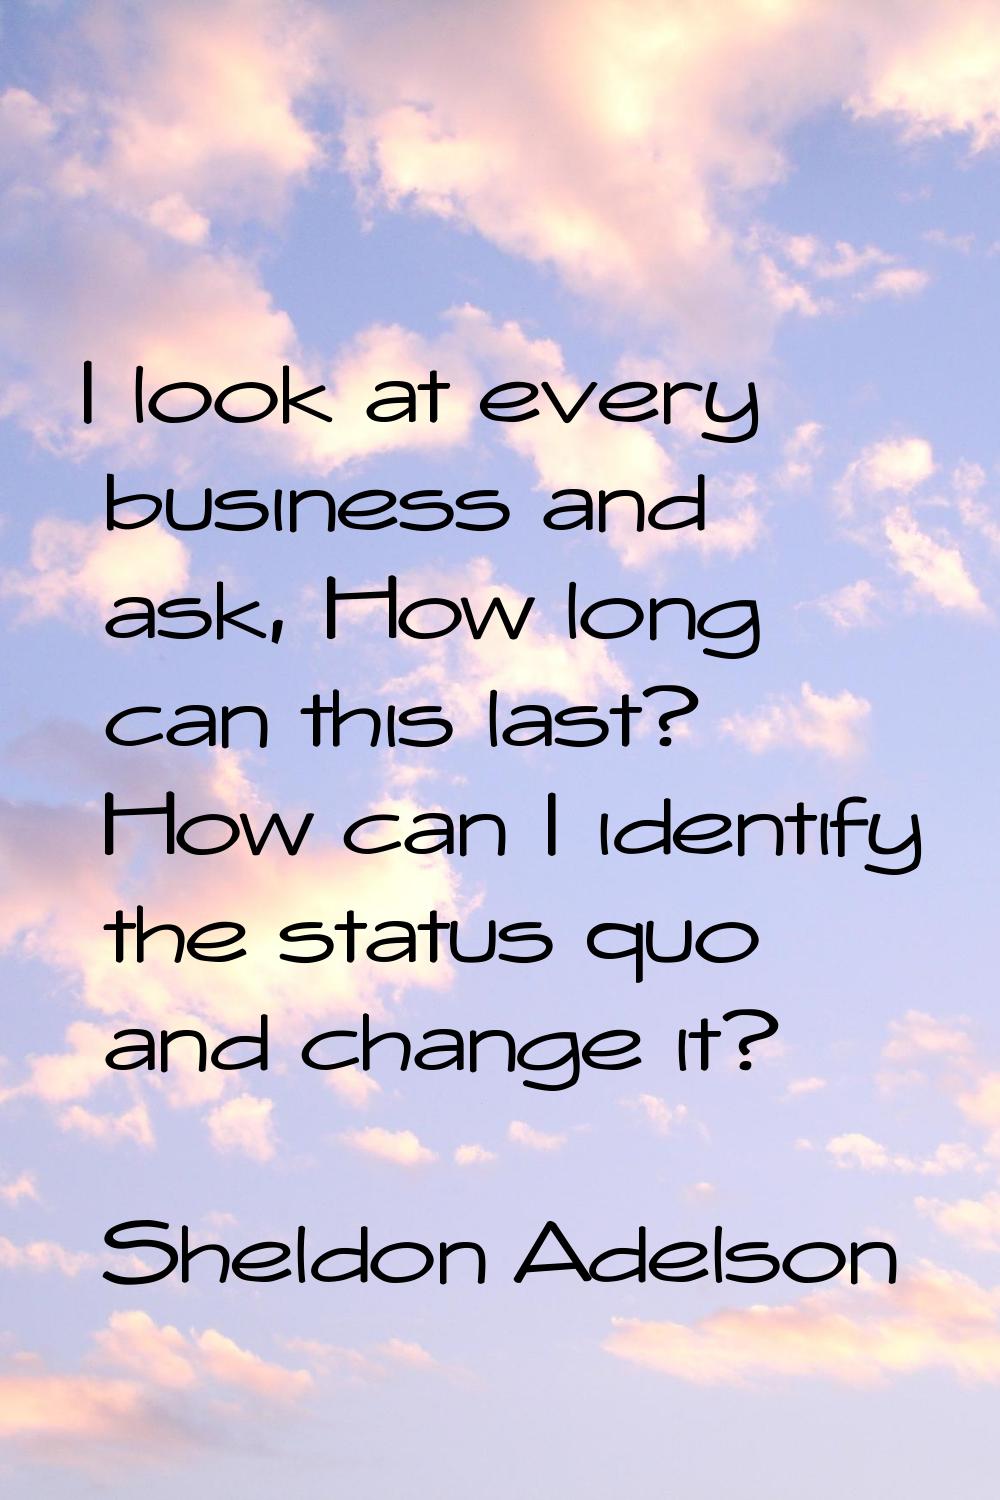 I look at every business and ask, How long can this last? How can I identify the status quo and cha